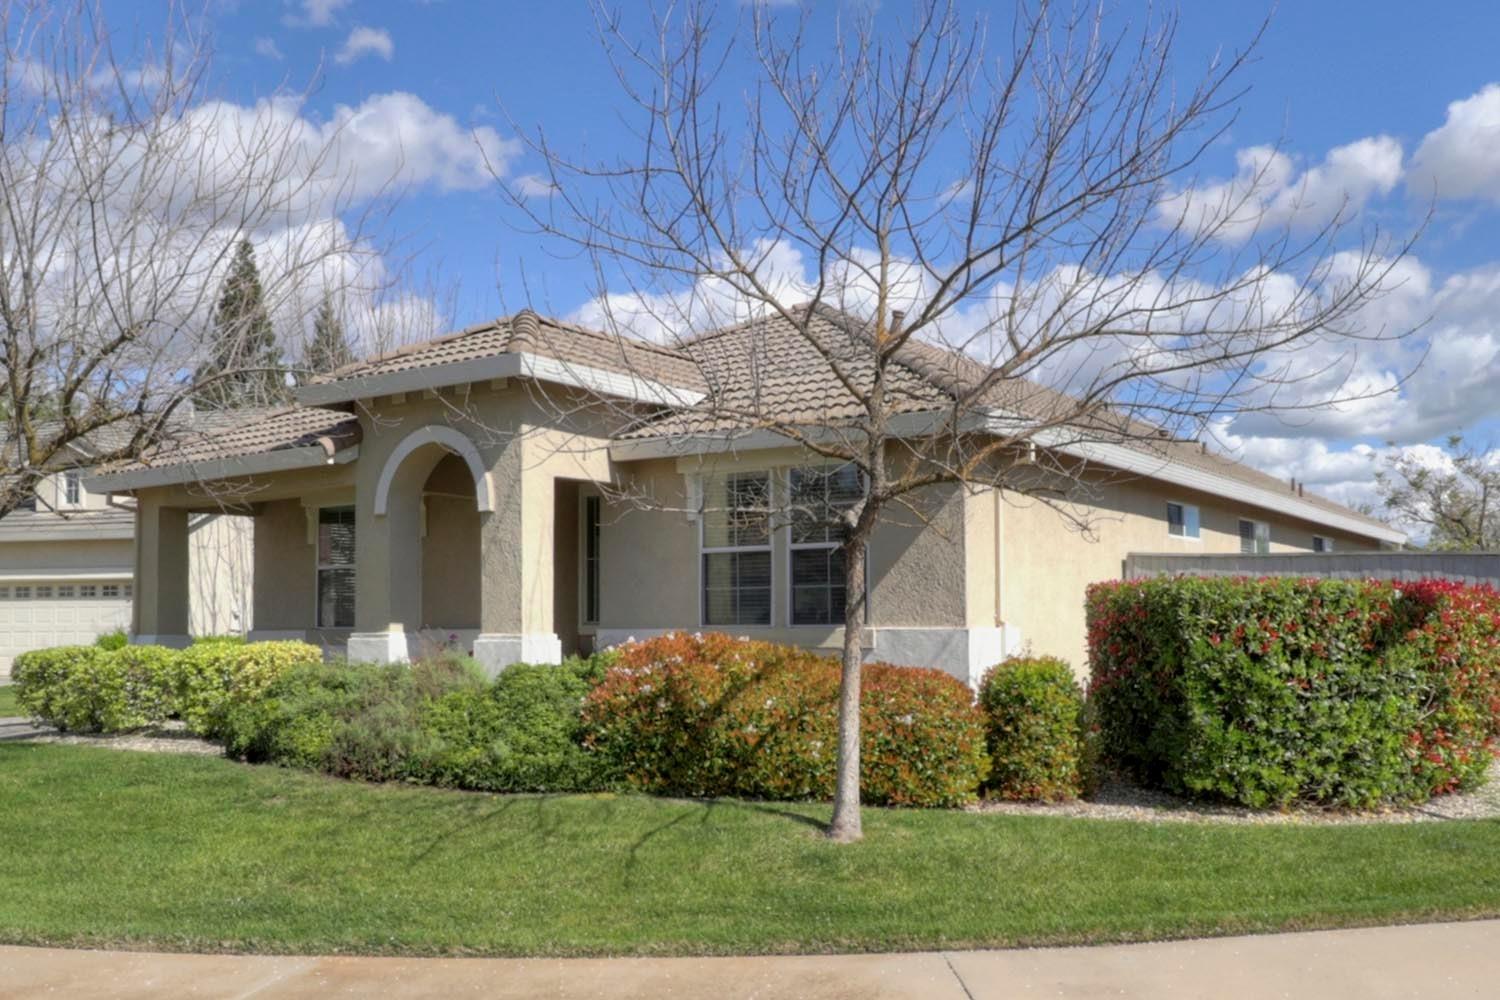 WELCOME TO LAGUNA WEST!! Here's your opportunity to live in a desirable location in Elk Grove. Open 